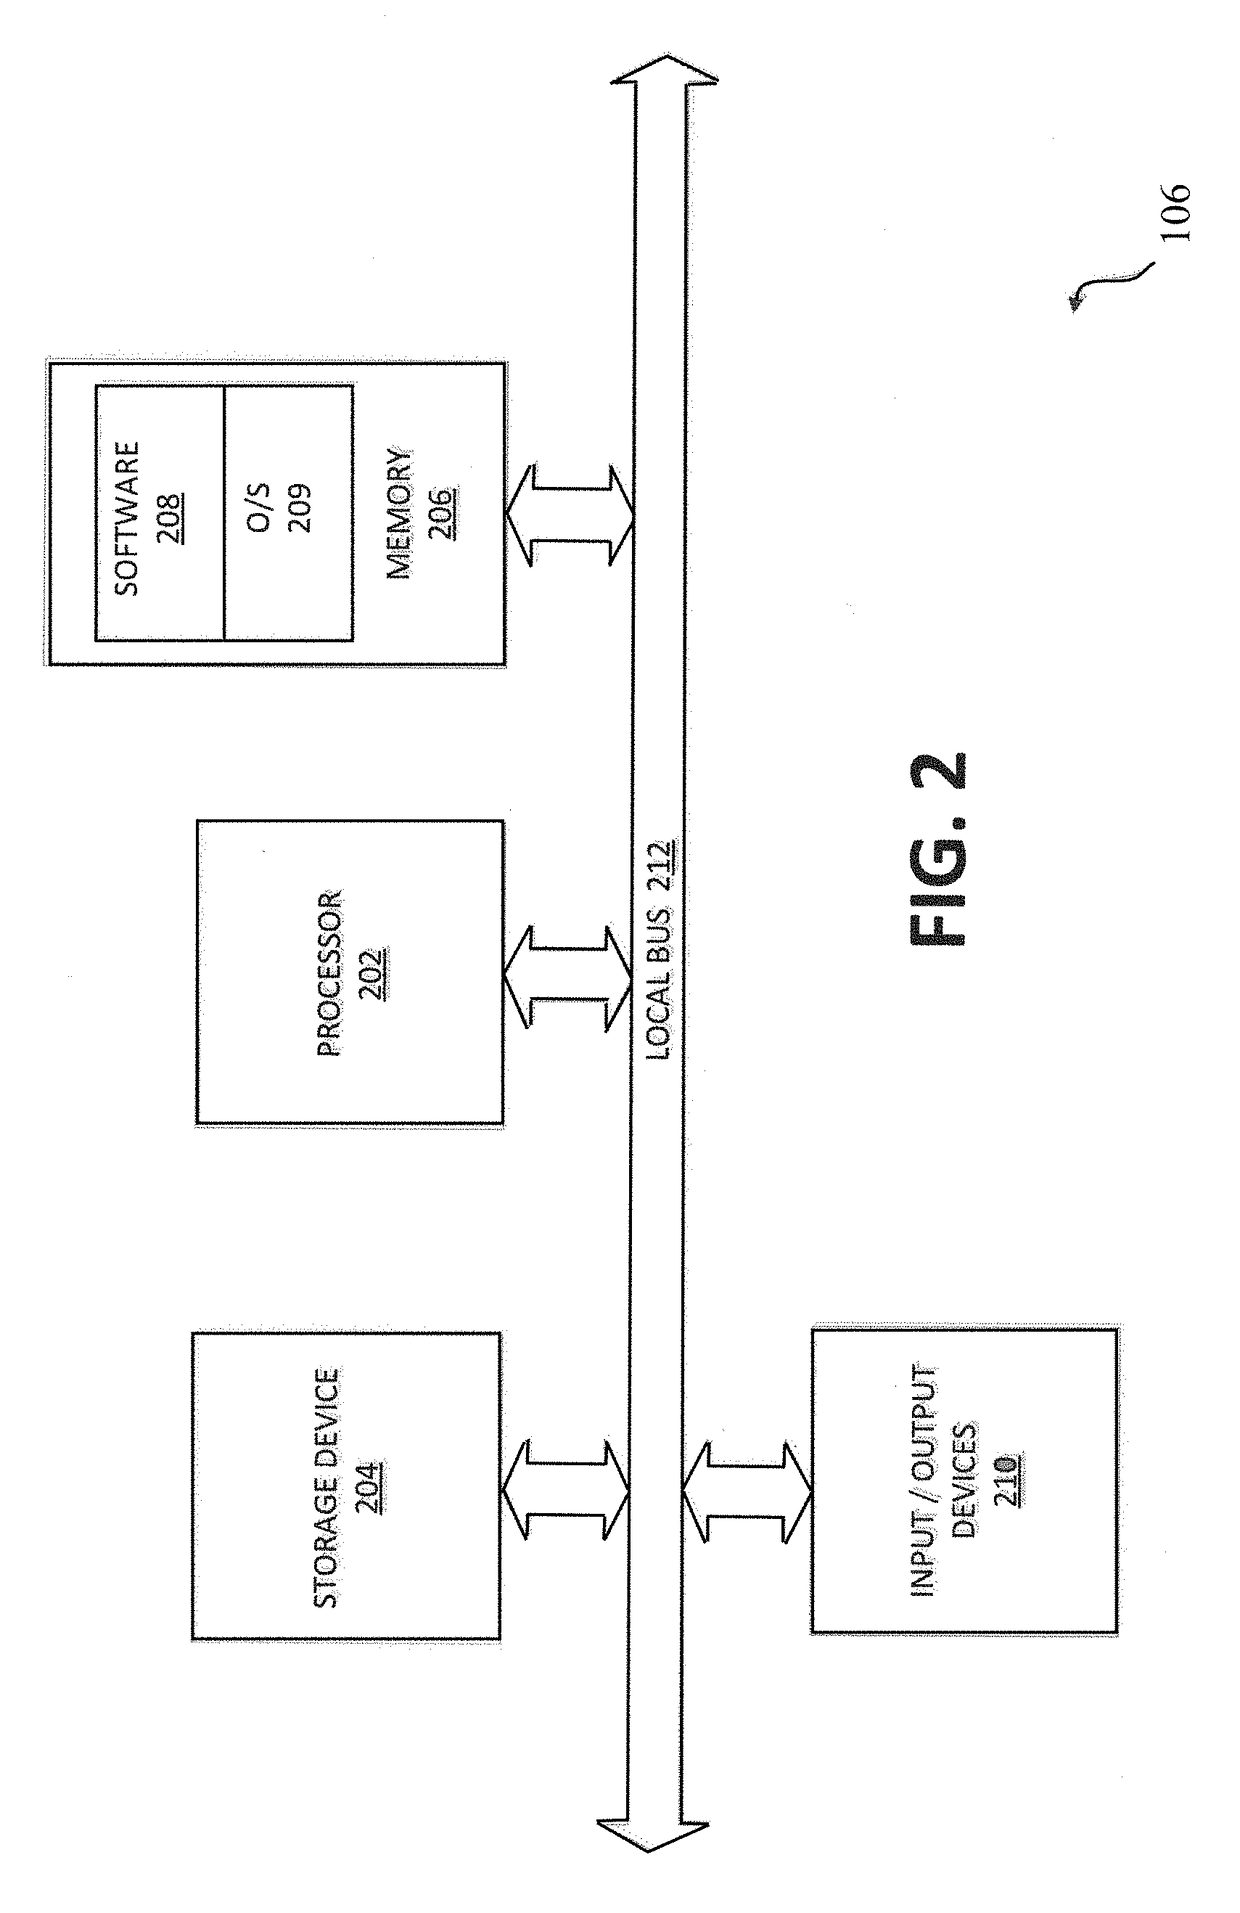 Artificial intelligence system for use in conducting clinical trials